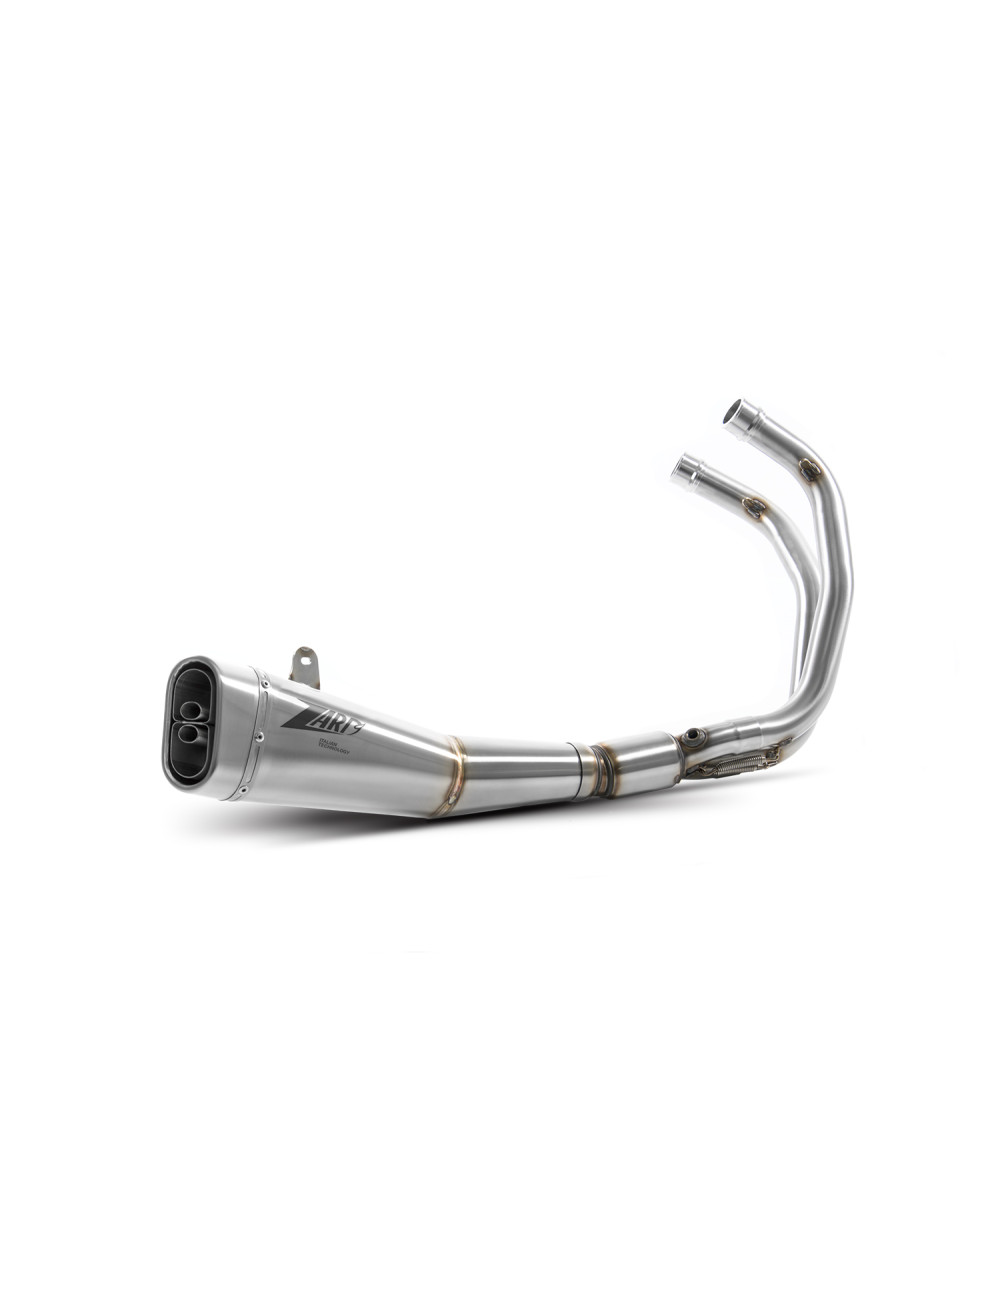 Exhaust mt 07 Yamaha XSR700 Full Kit Approved Stainless Racing